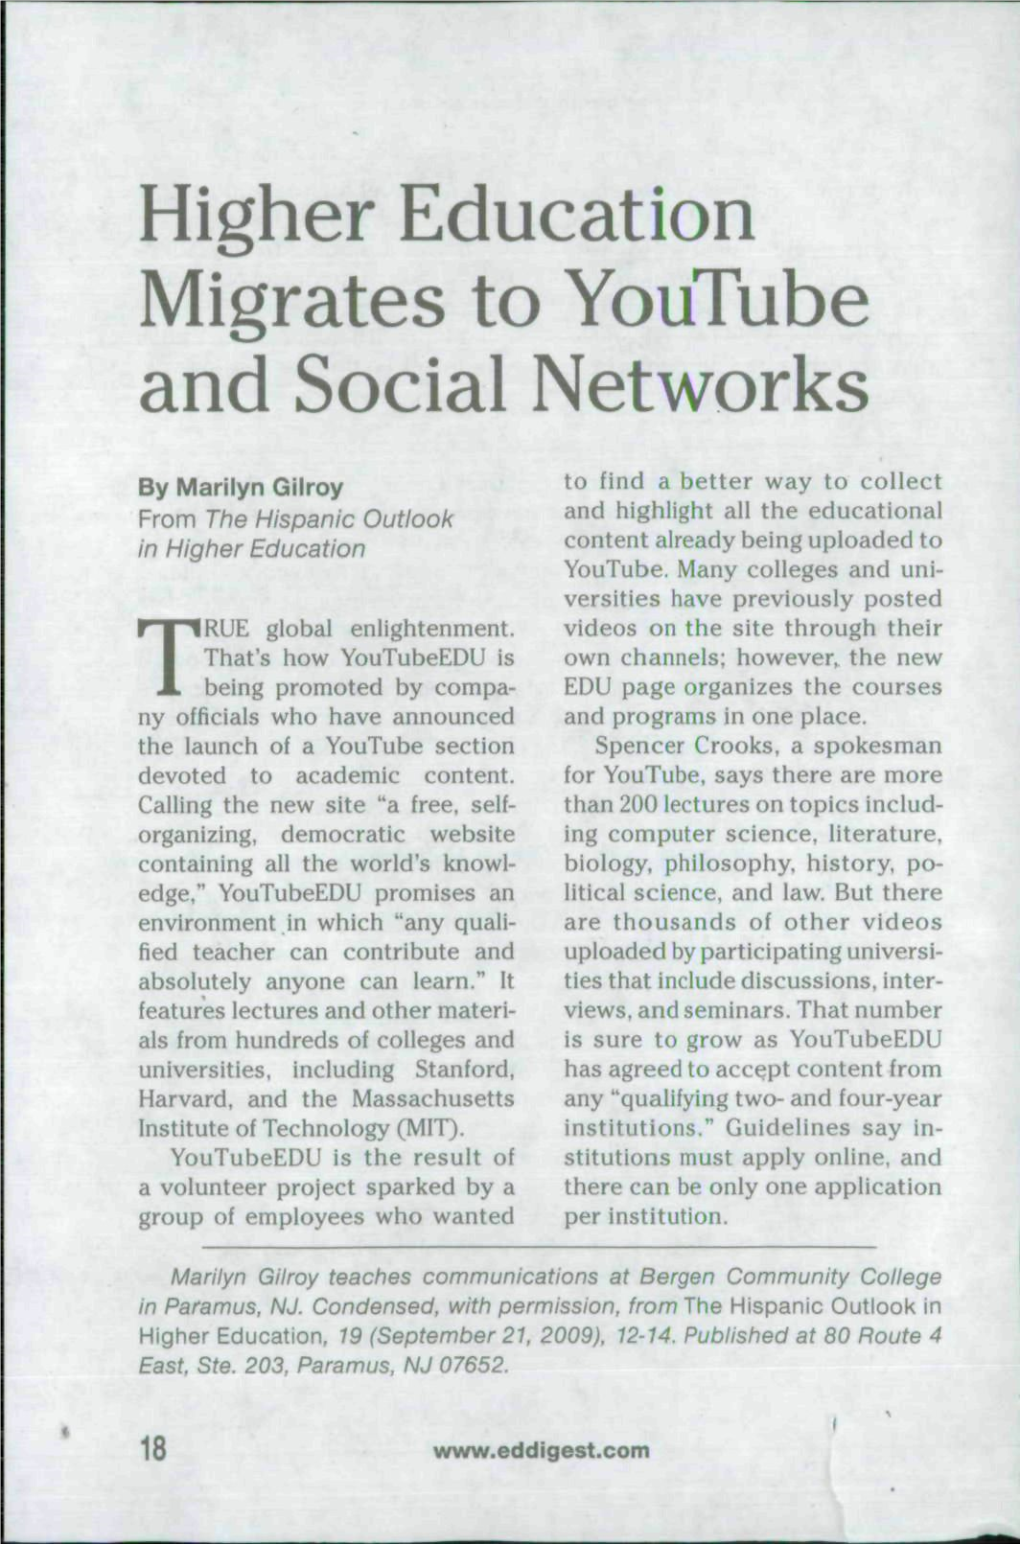 Higher Education Migrates to Youtube and Social Networks